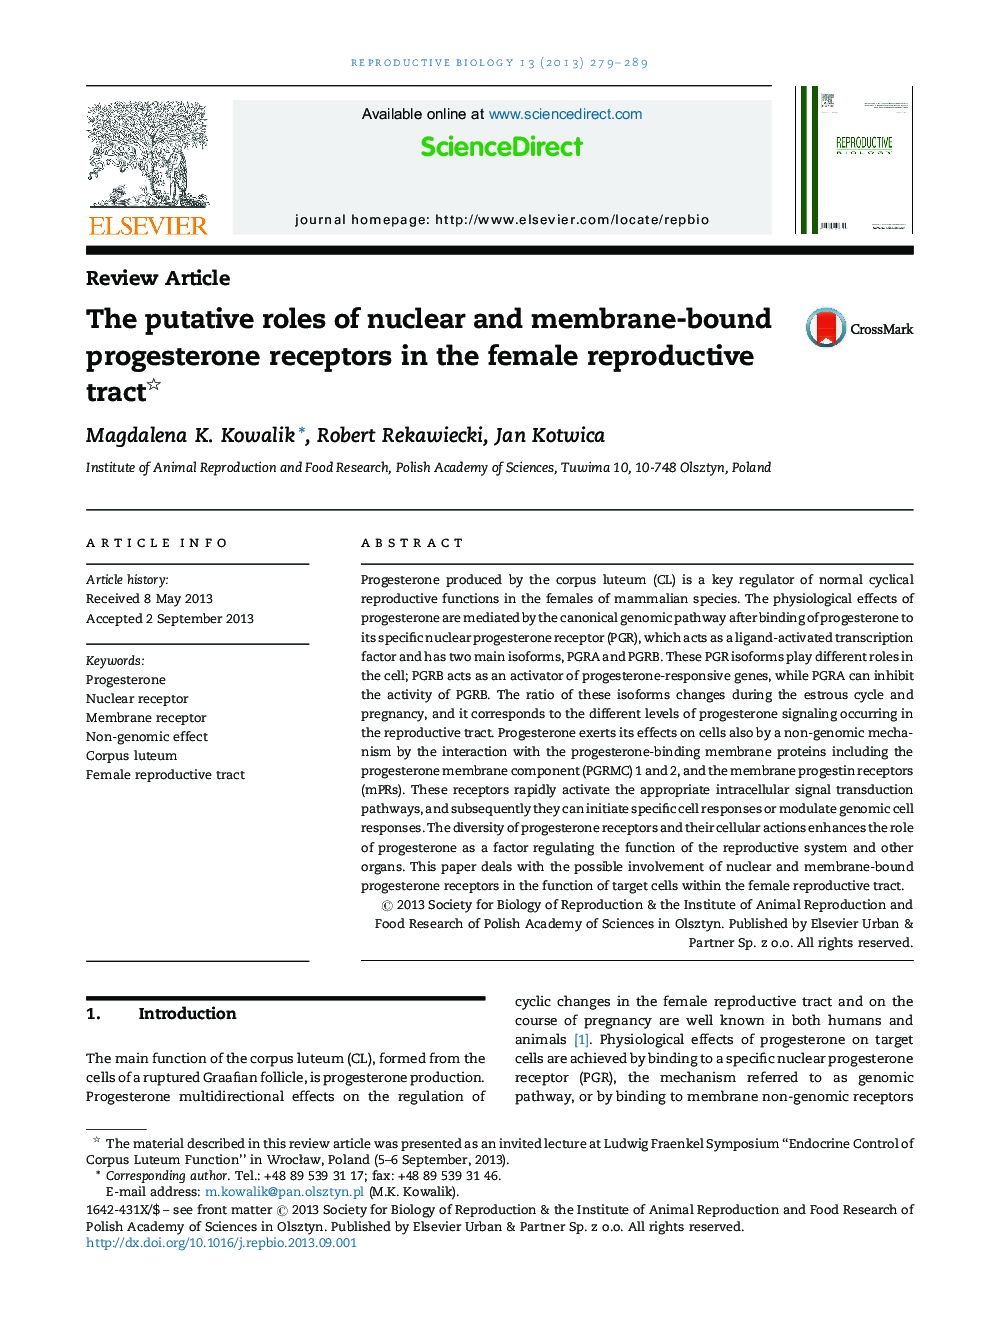 The putative roles of nuclear and membrane-bound progesterone receptors in the female reproductive tract 